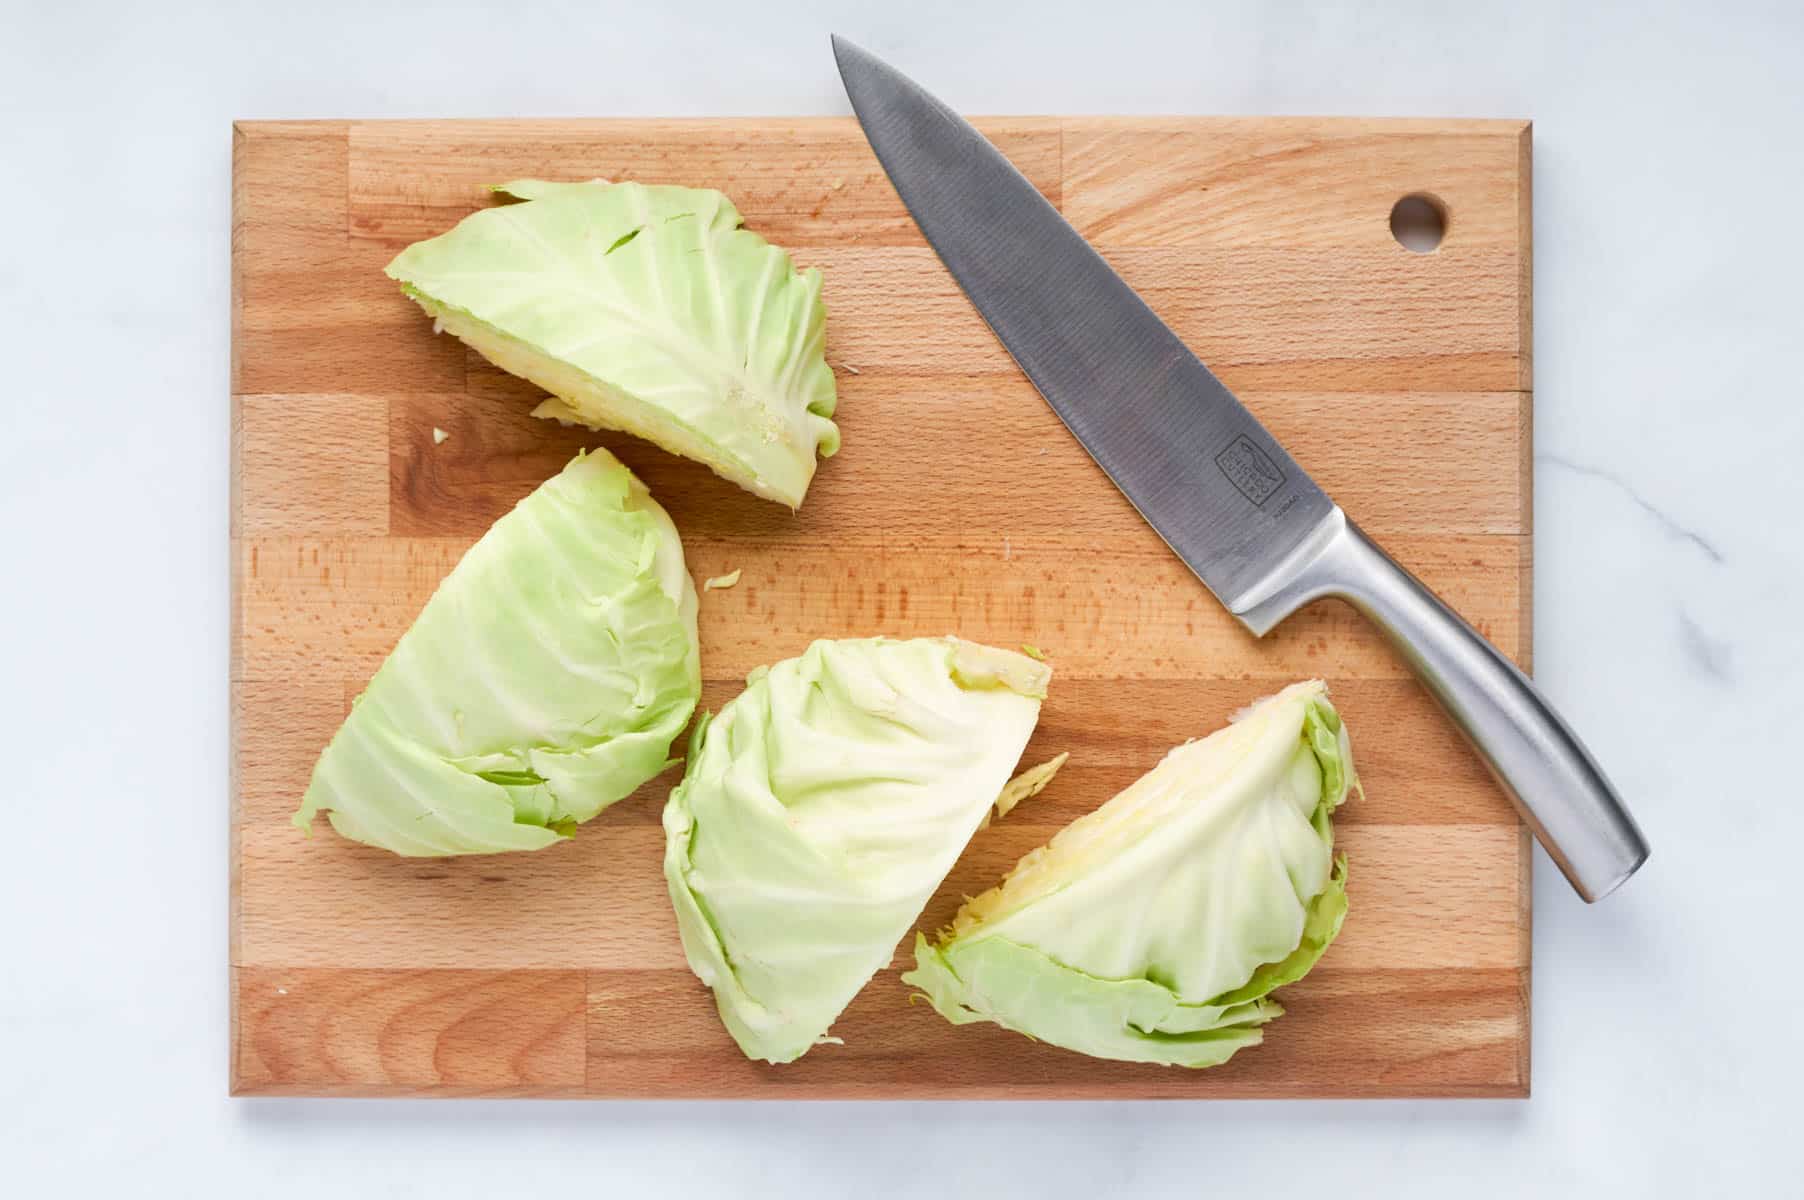 Cabbage is quartered on a cutting board.